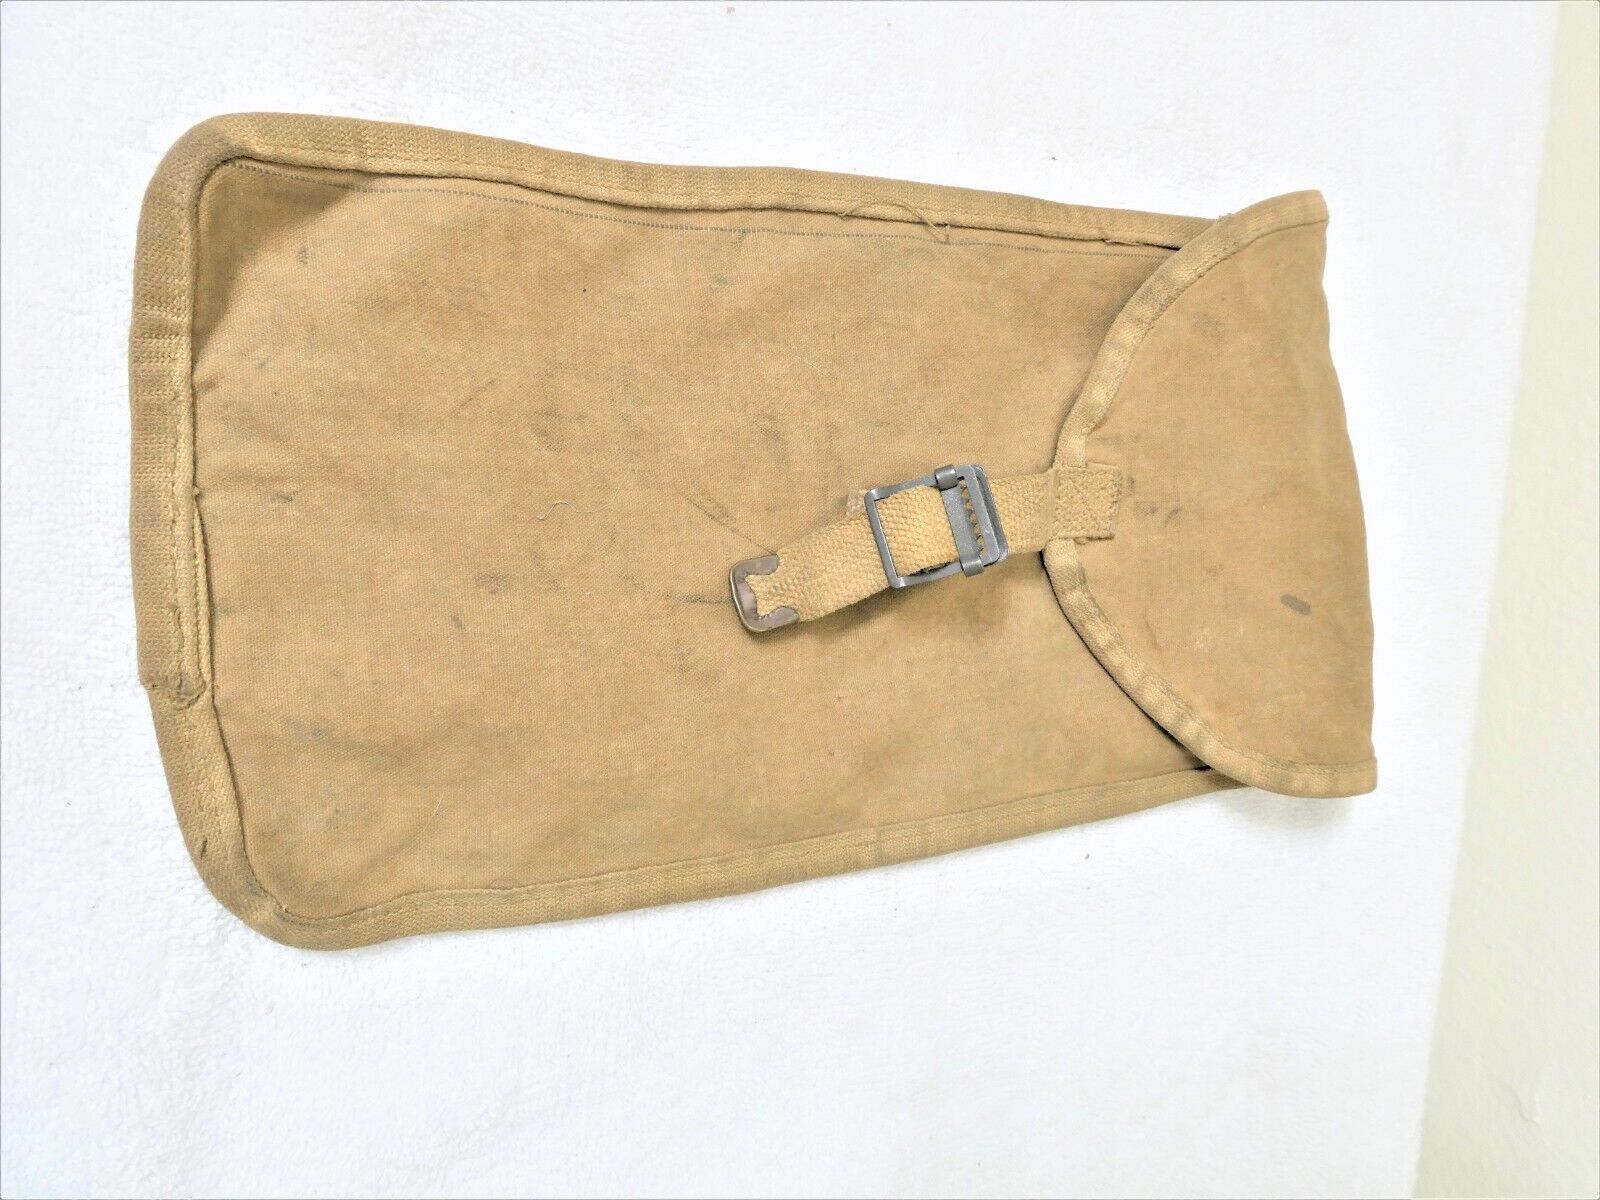 WW1 US Army Instrument or Sight Canvas Pouch